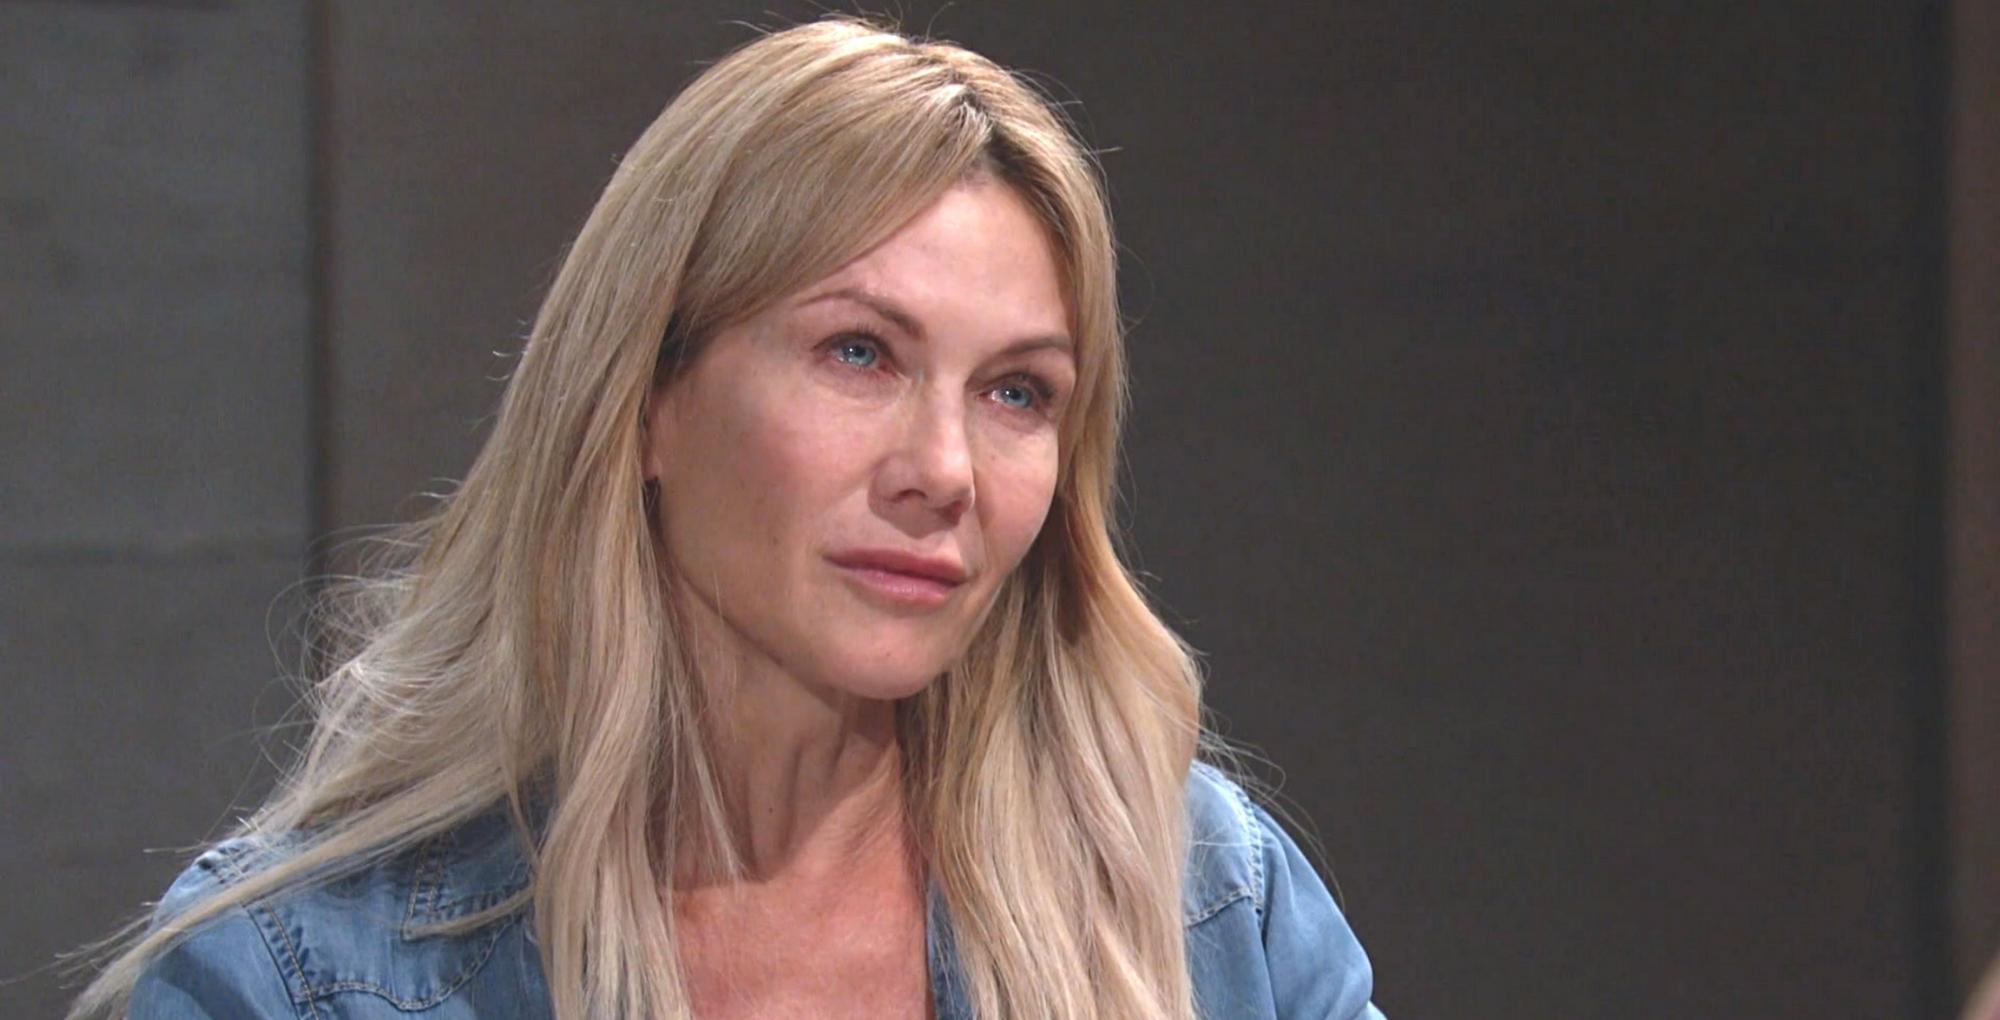 days of our lives spoilers for march 30, 2023 have kristen dimera getting a visitor in jail